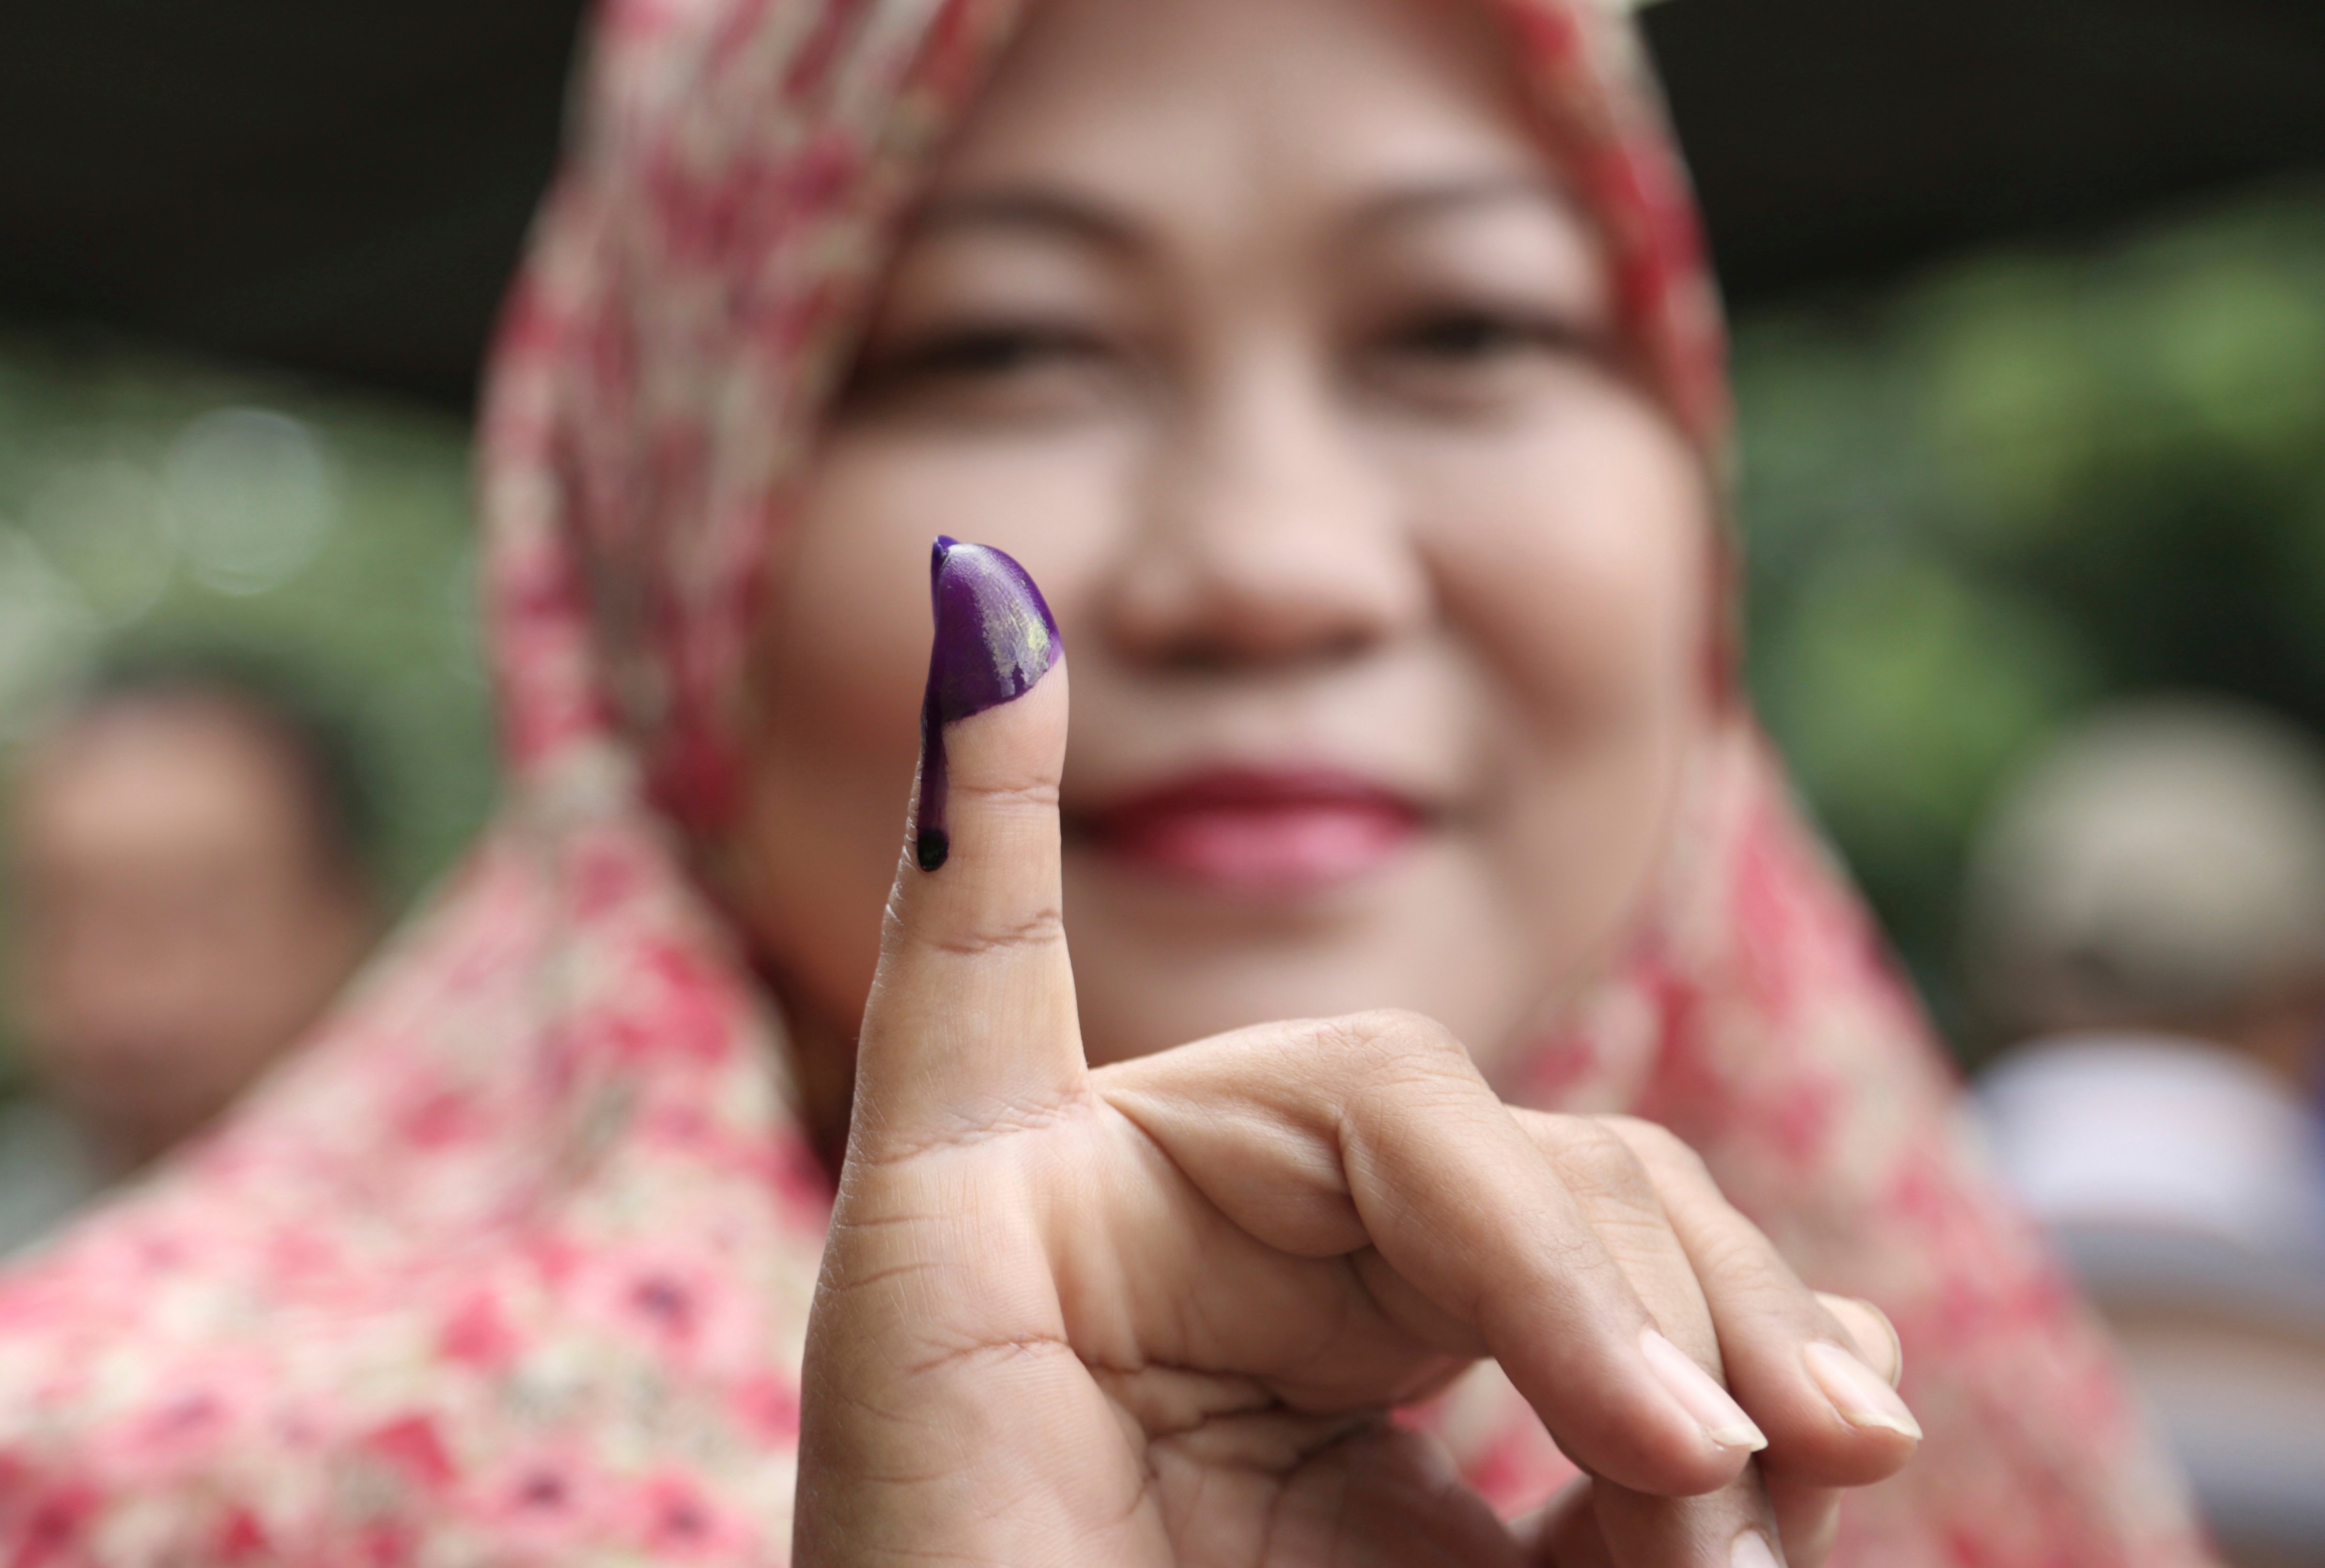 A Muslim woman shows her ink-stained finger after voting in the gubernatorial election in Jakarta on Feb. 15, 2017 (Achmad Ibrahim—AP)